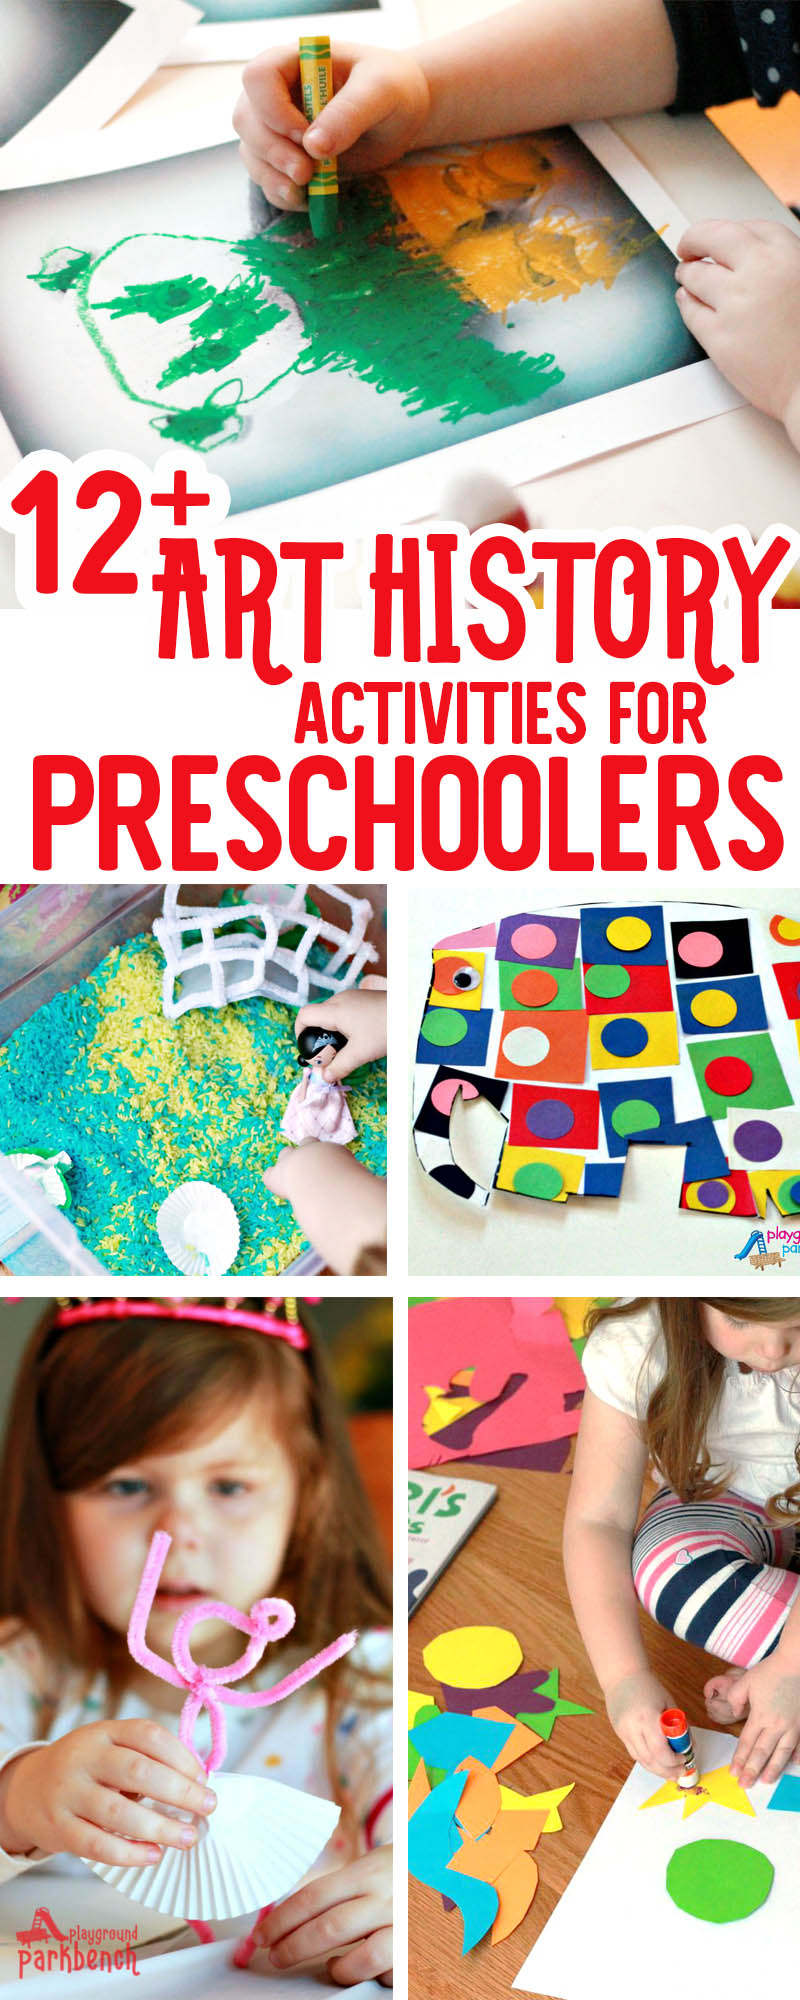 Preschoolers will love learning about the Great Artists, as well as trying different art techniques and mediums in this Art History for Preschool series. 12+ different activities for kids covering the world's greatest artists from Matisse to Picasso, Van Gogh to Monet, Kandinsky to Warhol and more | Art for Kids | Preschool | Early Childhood Education | Kids Activities 